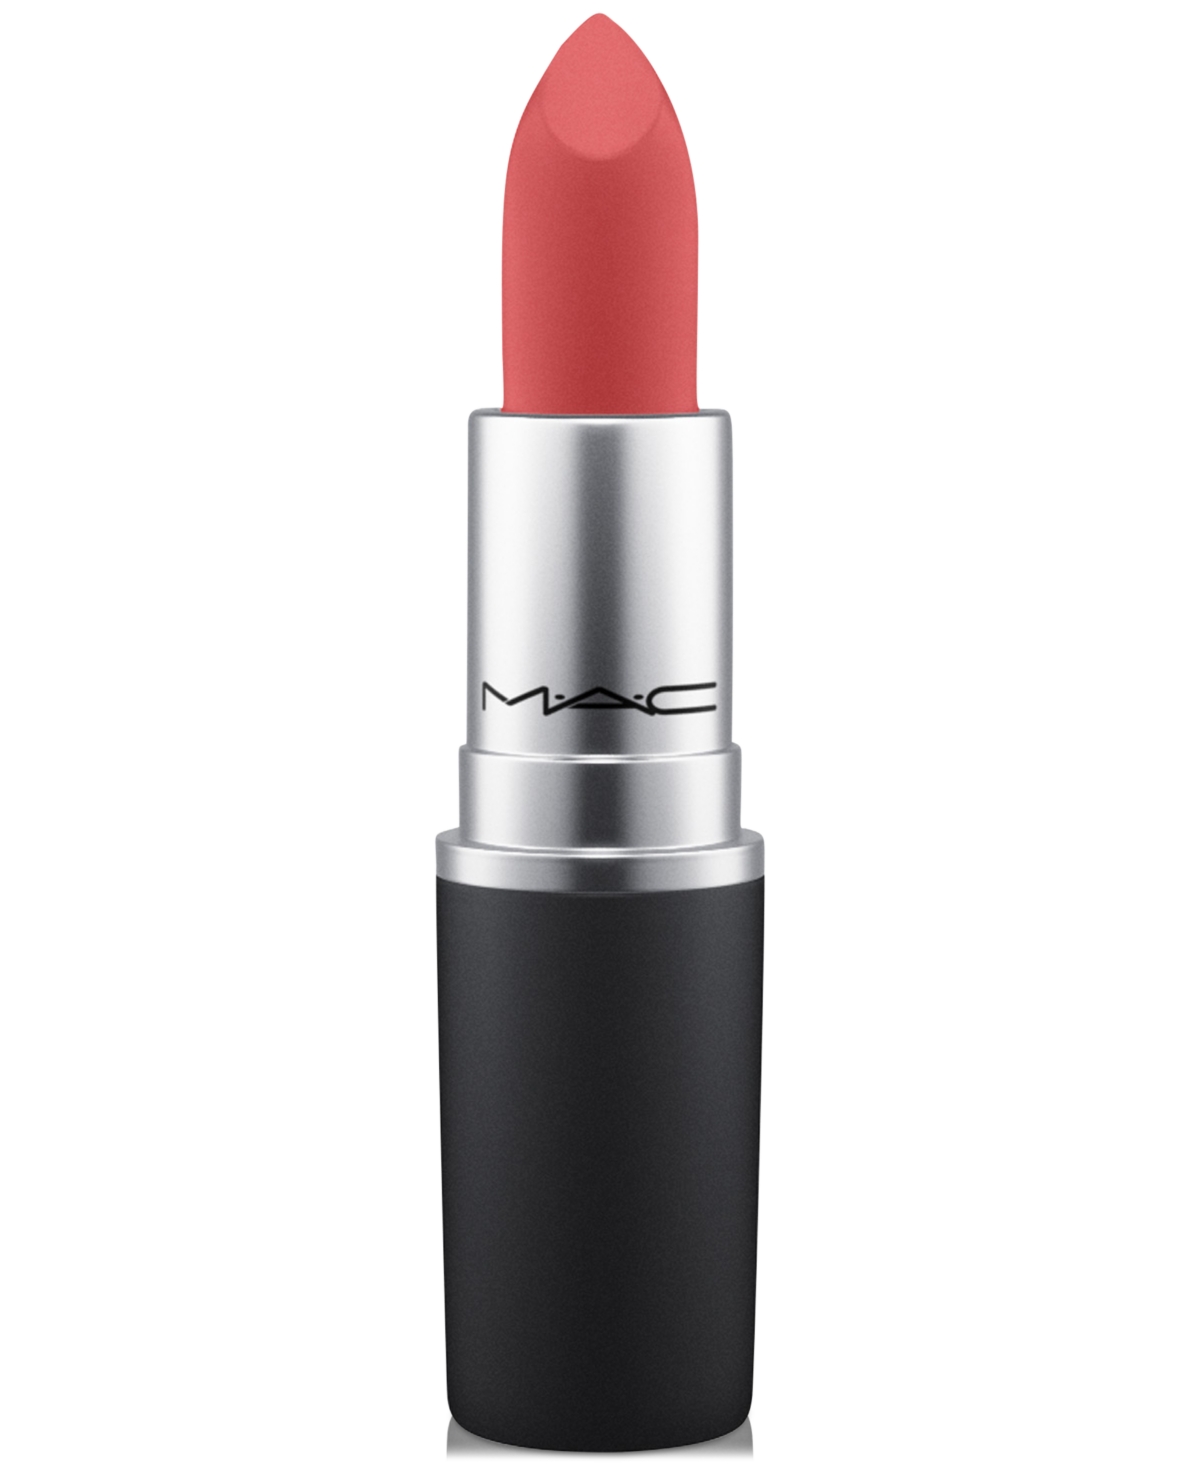 Mac Powder Kiss Lipstick In Stay Curious (muted Pinky Red)